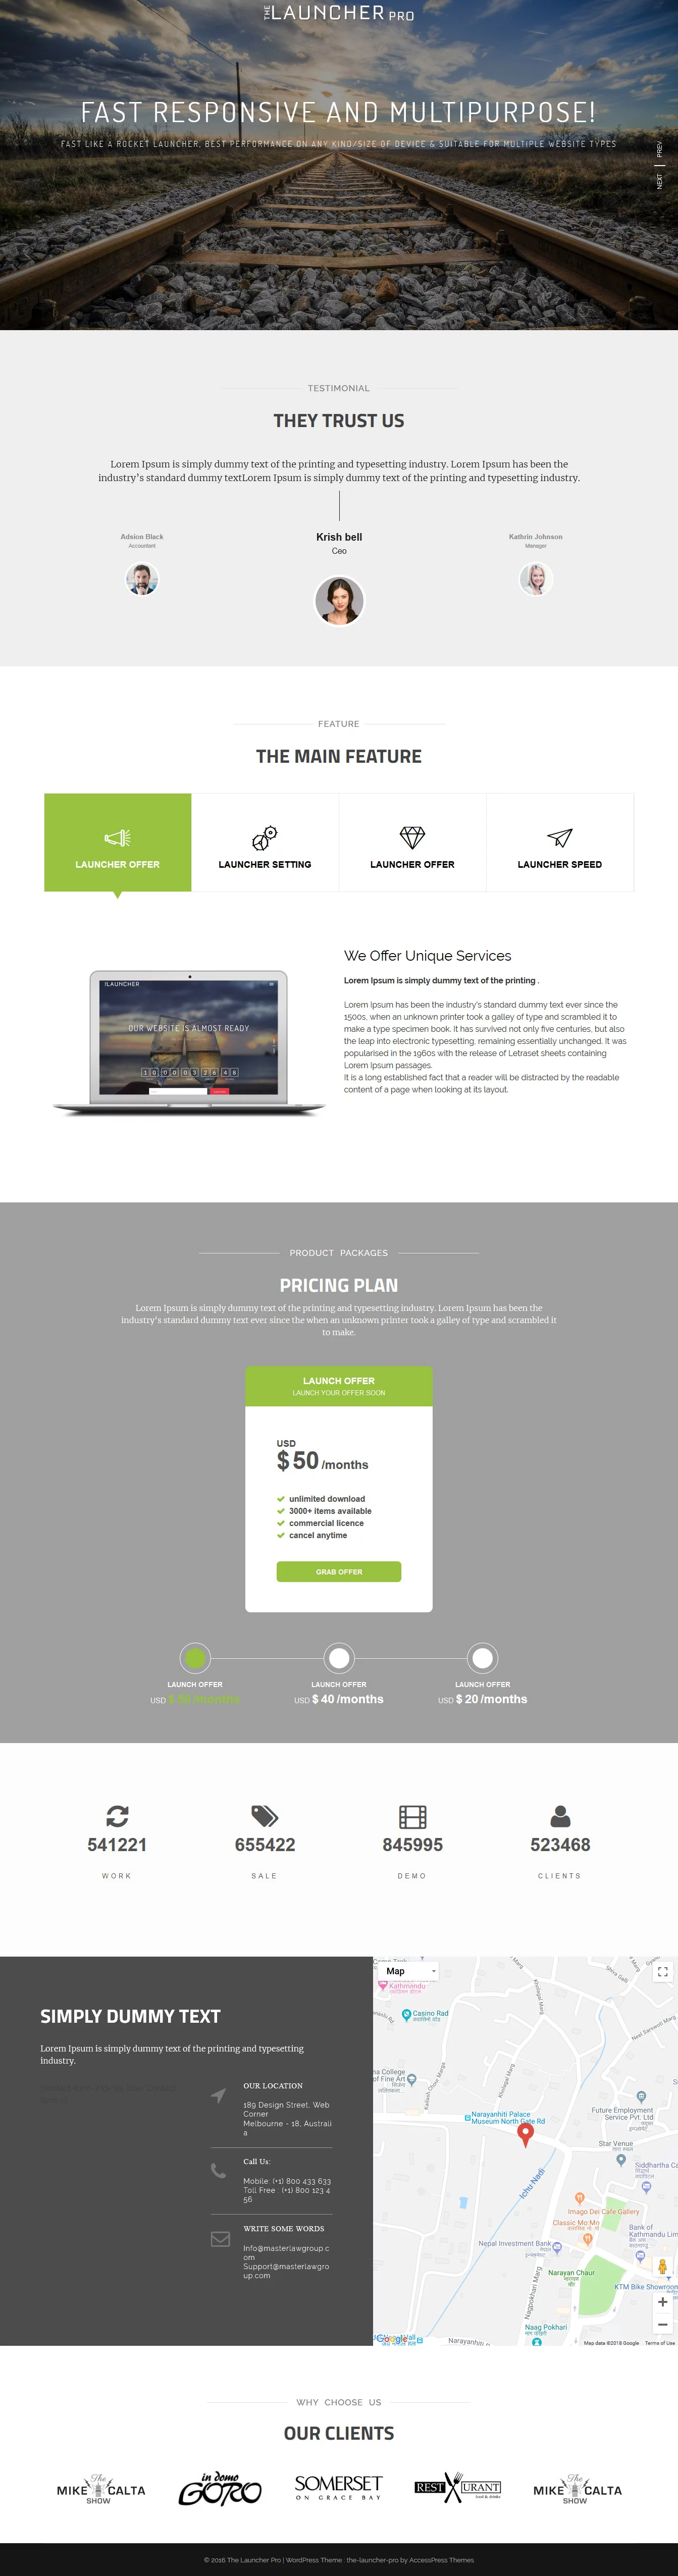 The Launcher Pro - Best Coming Soon and Under Construction Premium WordPress Themes and Templates 